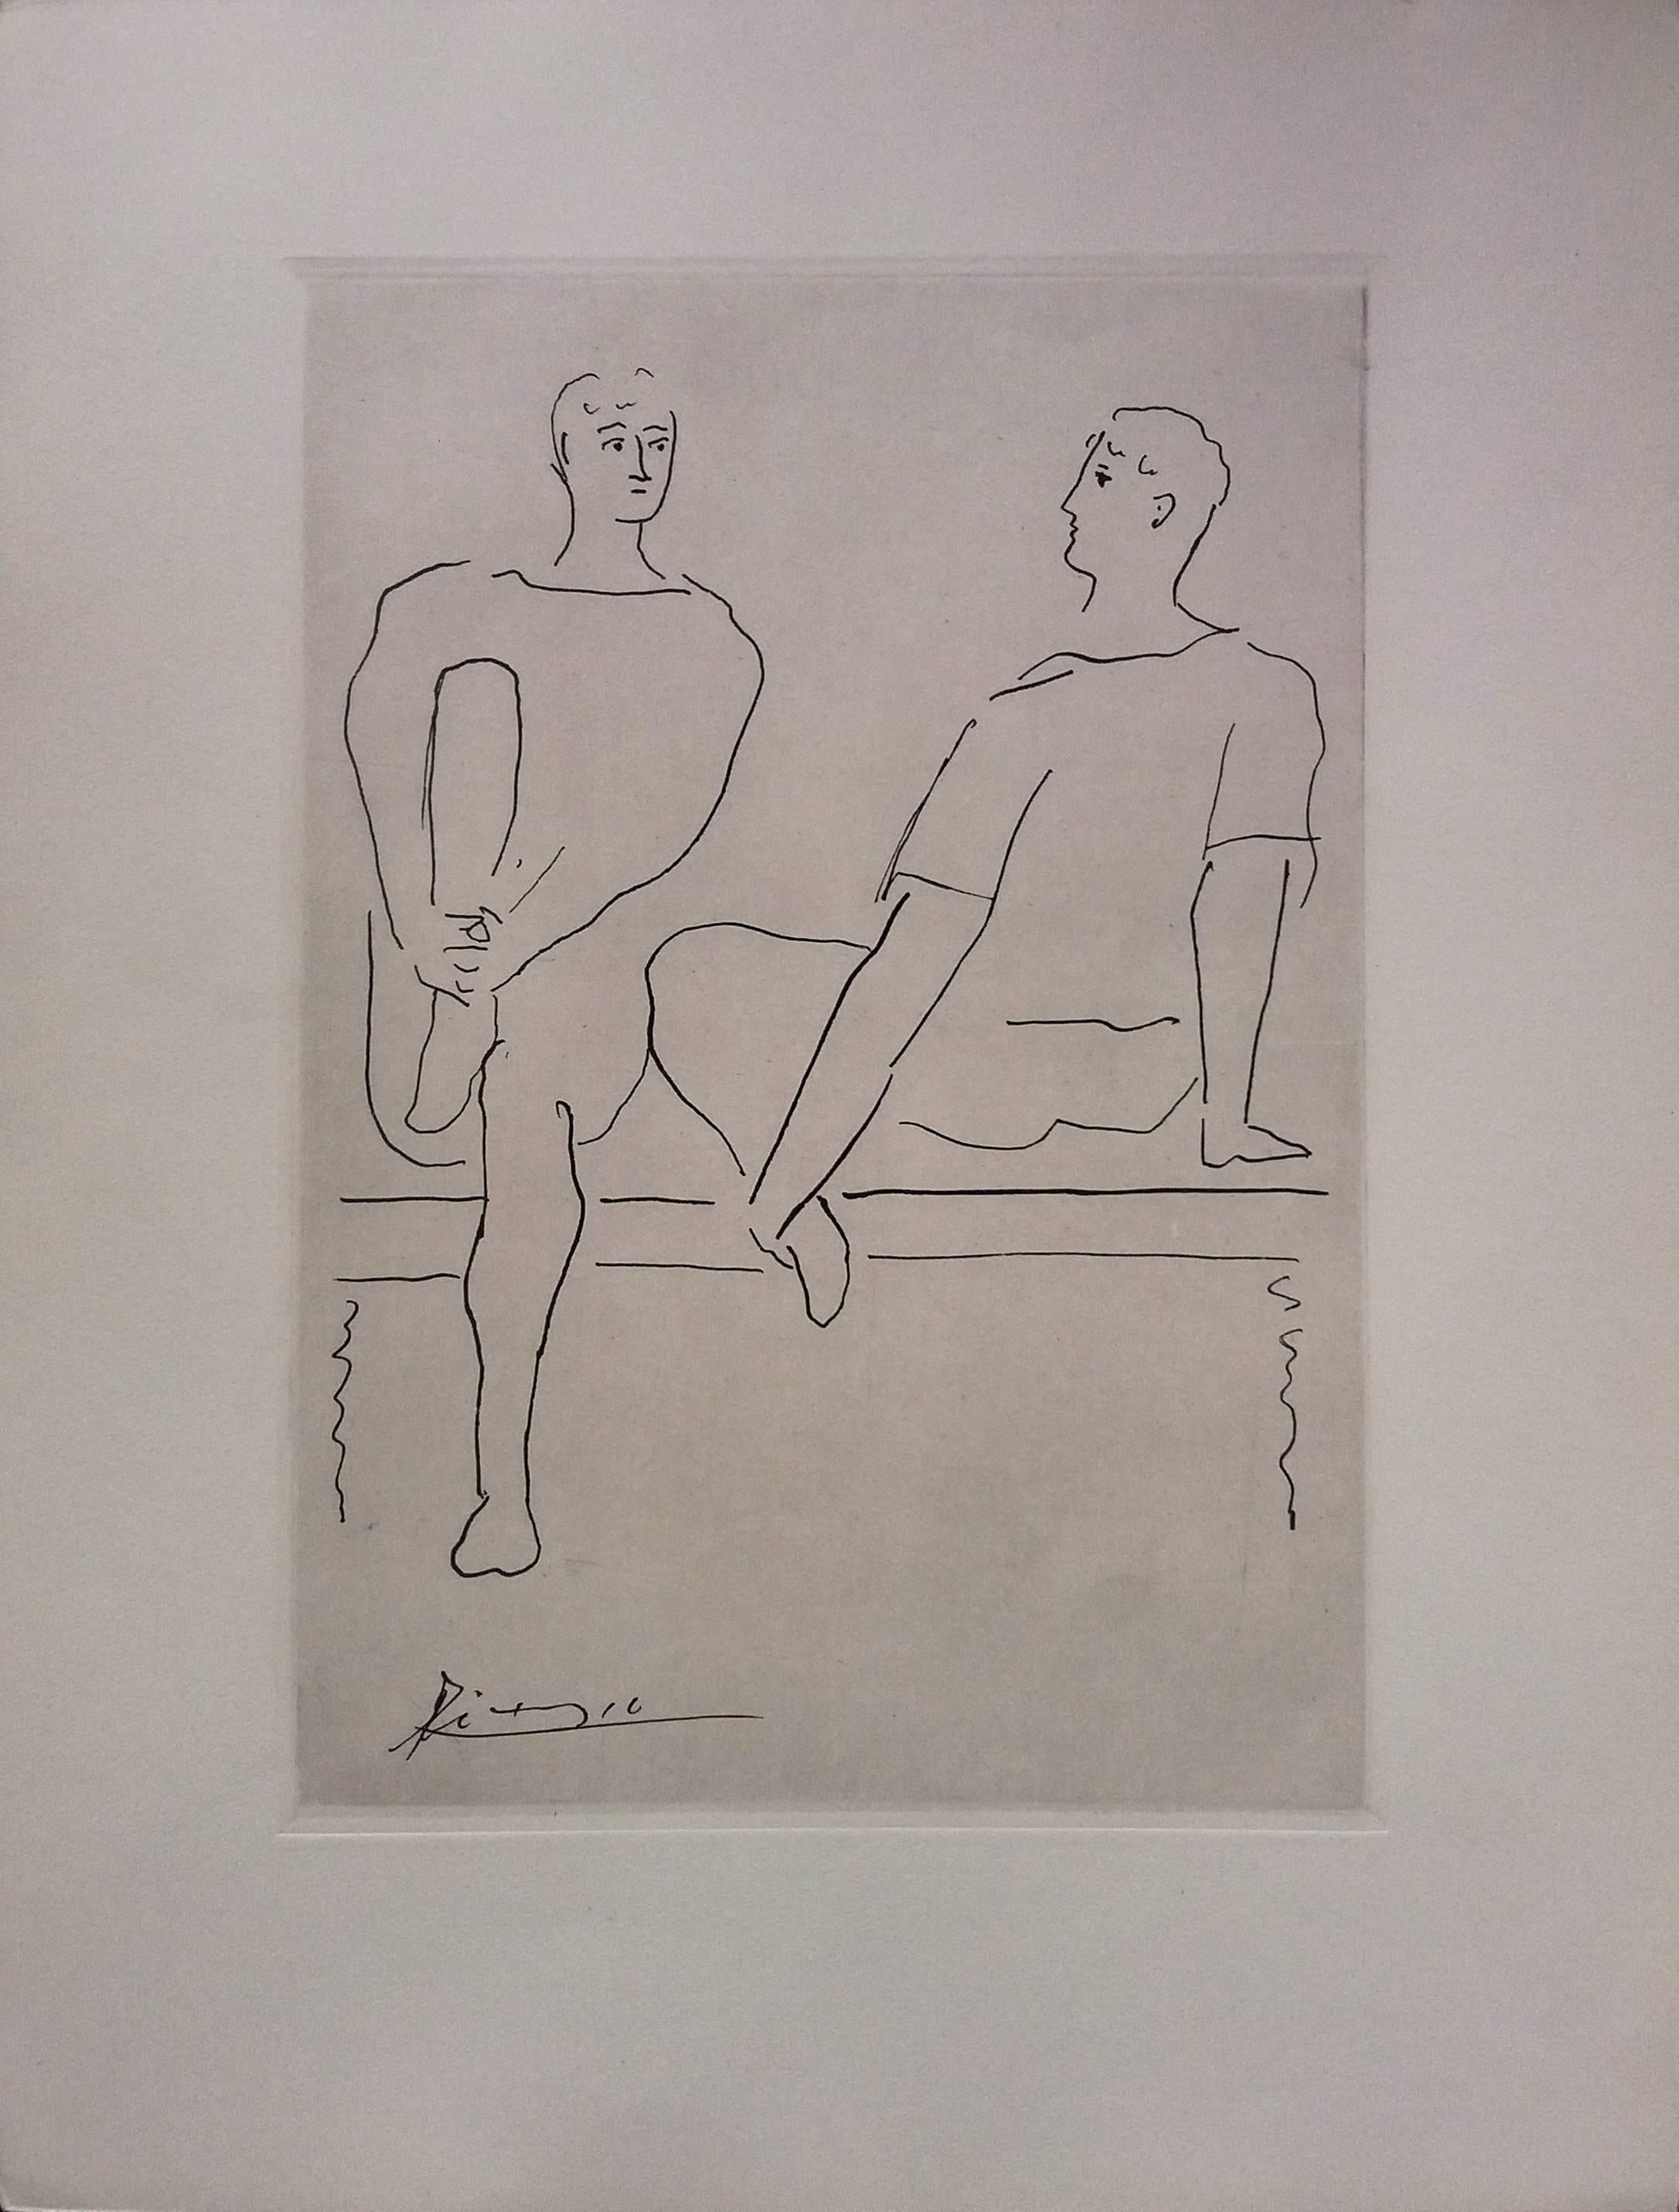 (after) Pablo Picasso Figurative Print - Pablo Picasso original drawing engraved on copper 6/8 (1943)